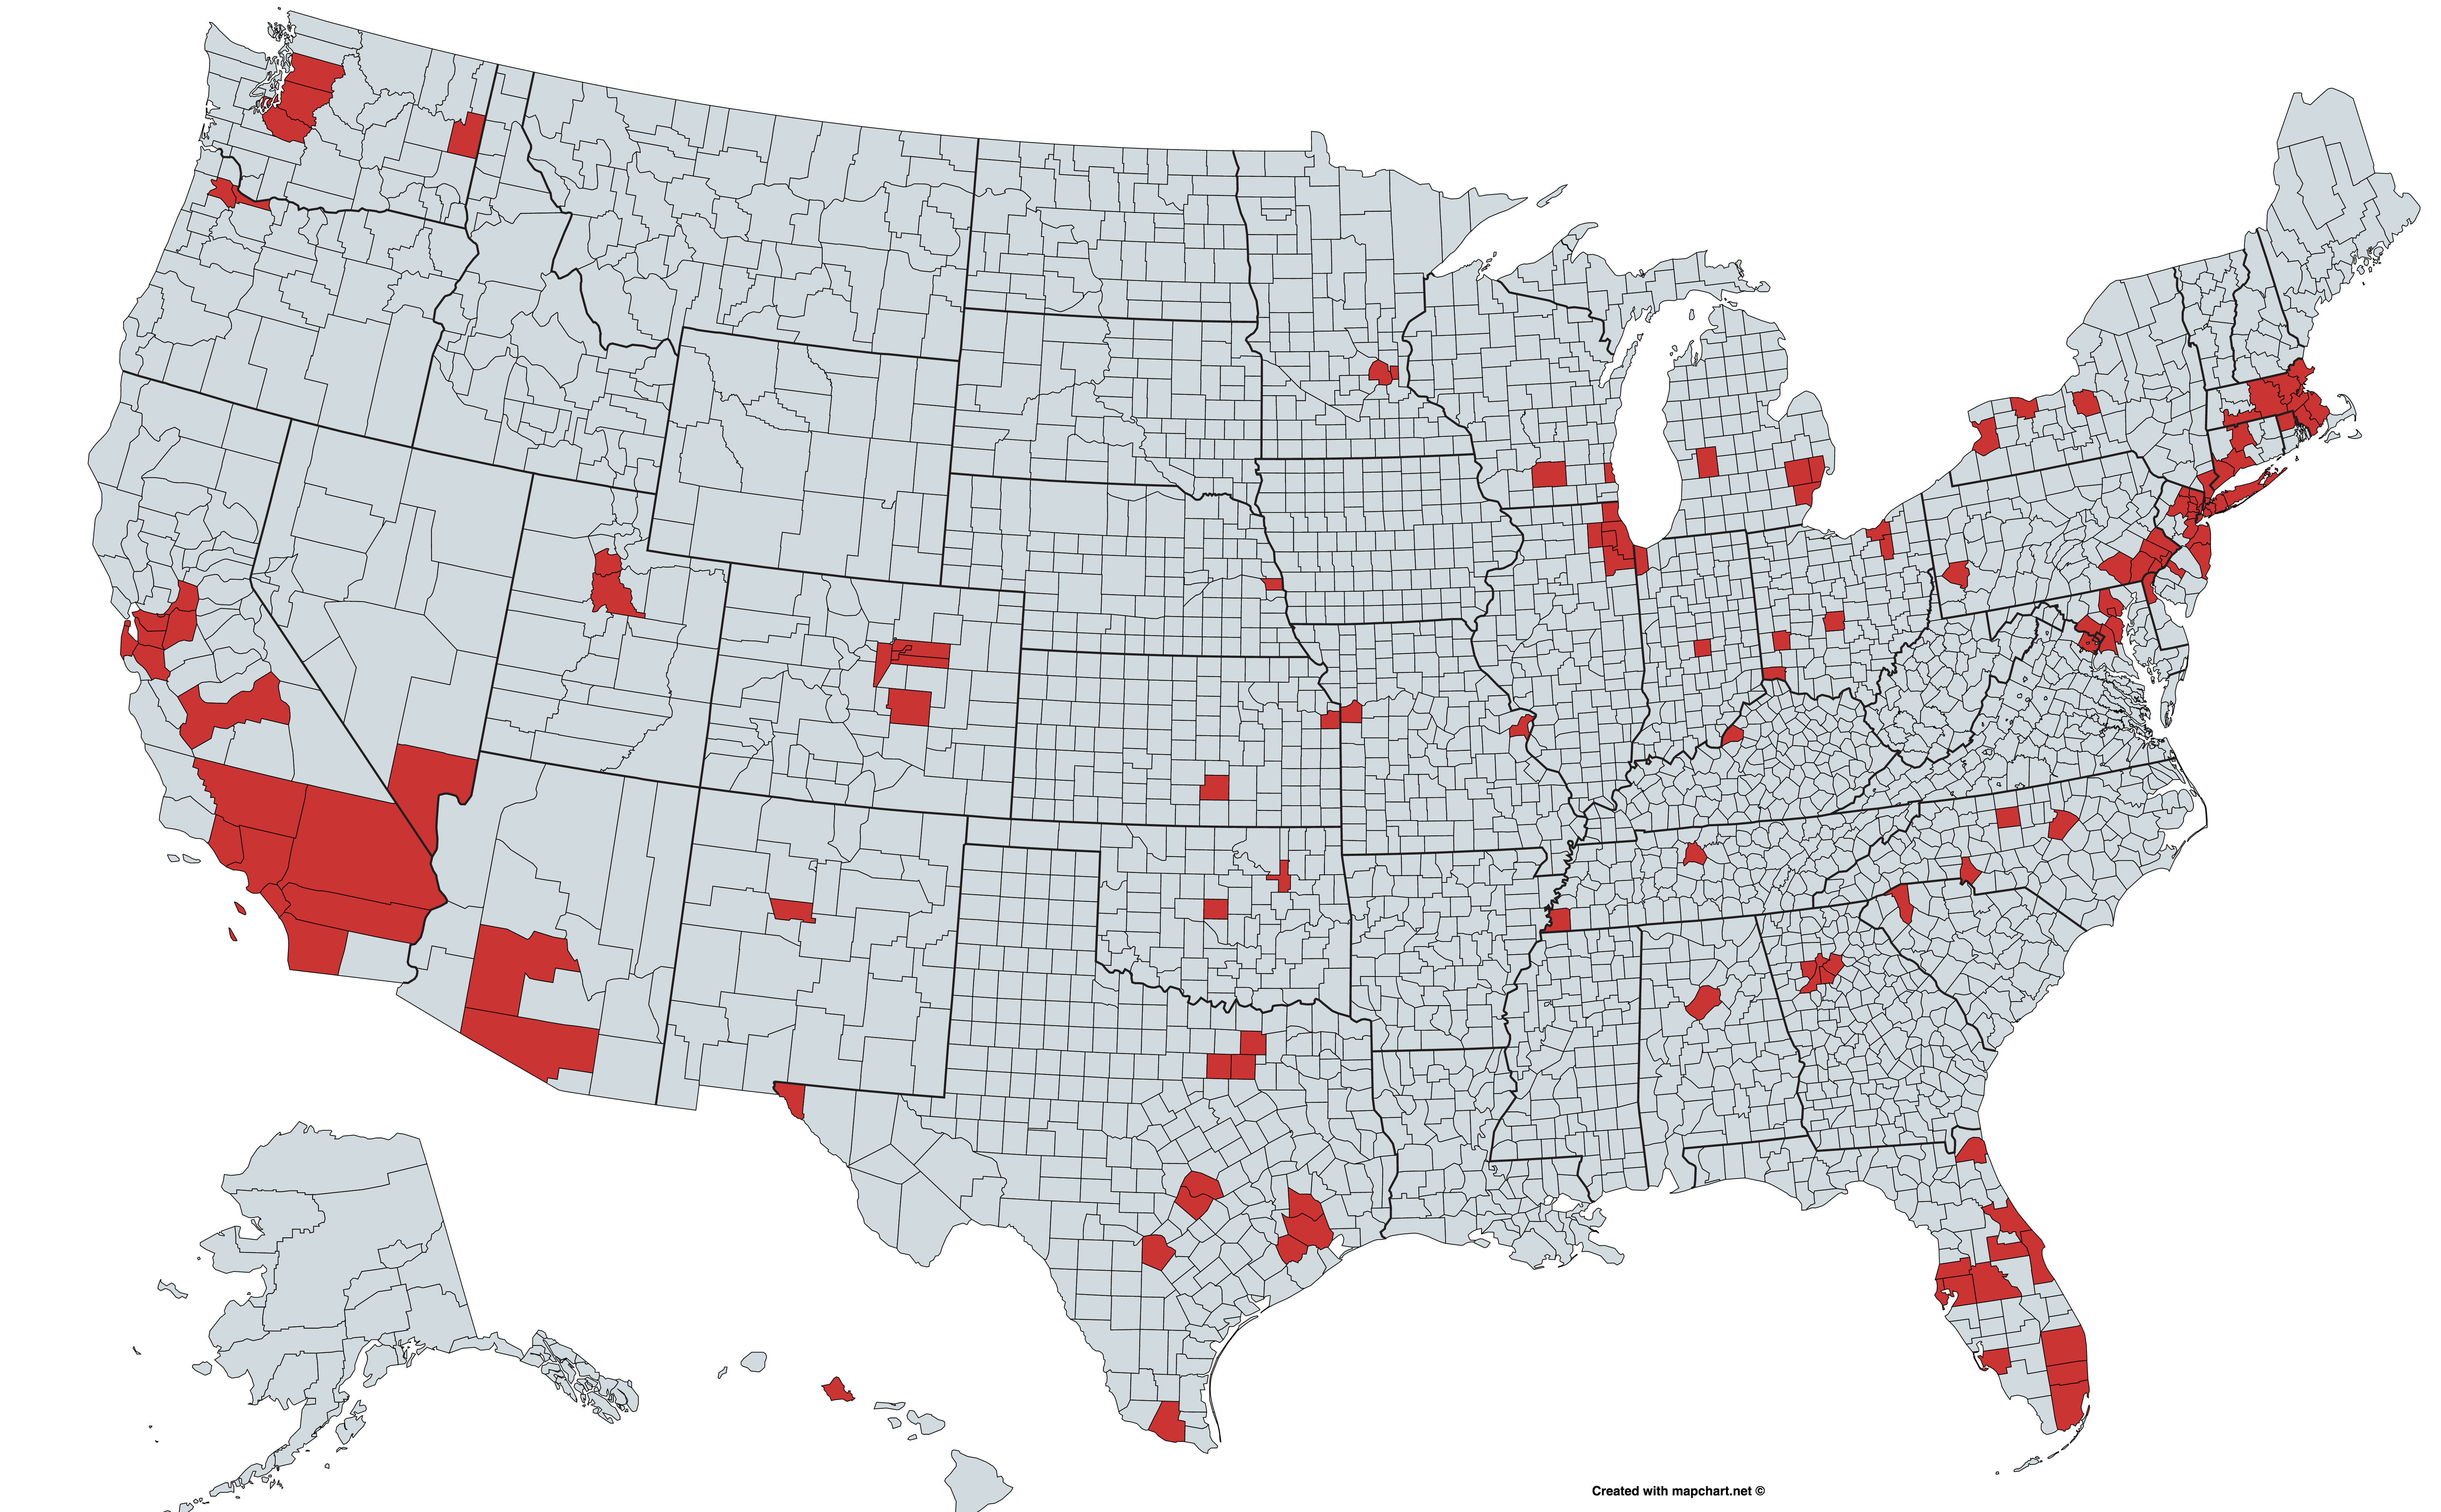 146 Most Populous Counties in the United States